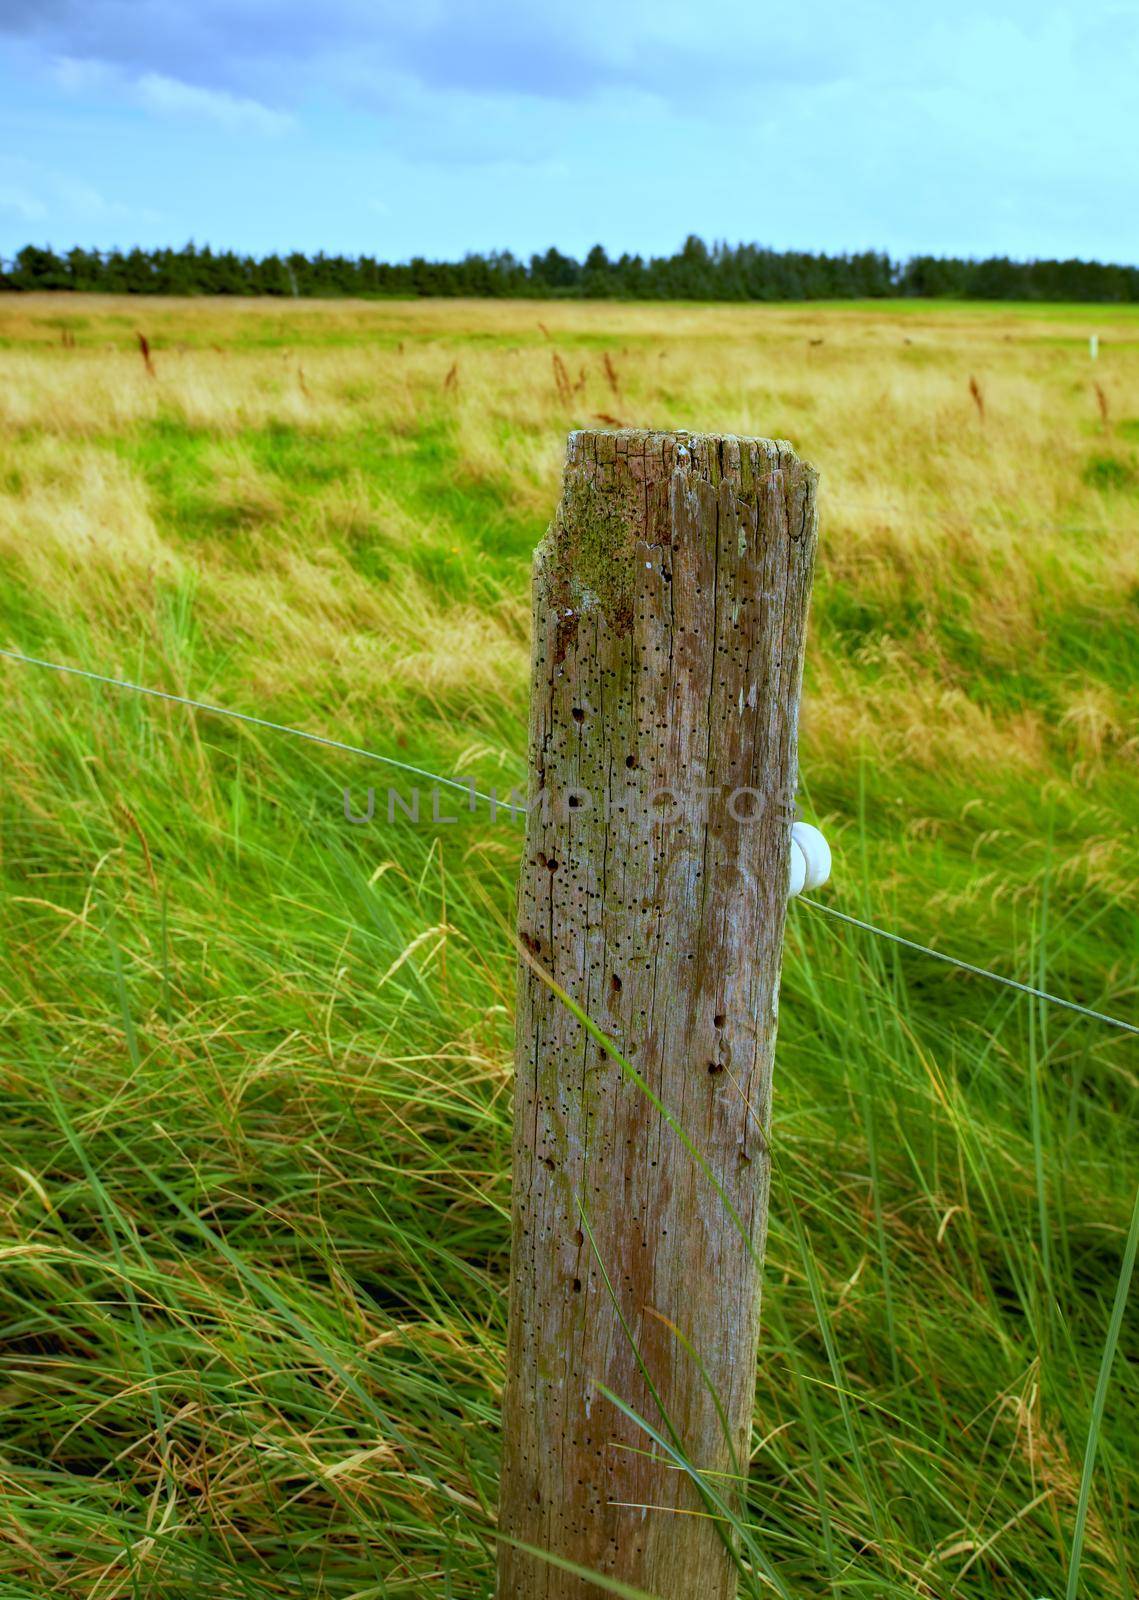 Wooden post and electric fence in remote field, meadow in the countryside during the day. Fencing used as boundary to protect farm animals from escaping from green pasture and farmlands in the country by YuriArcurs